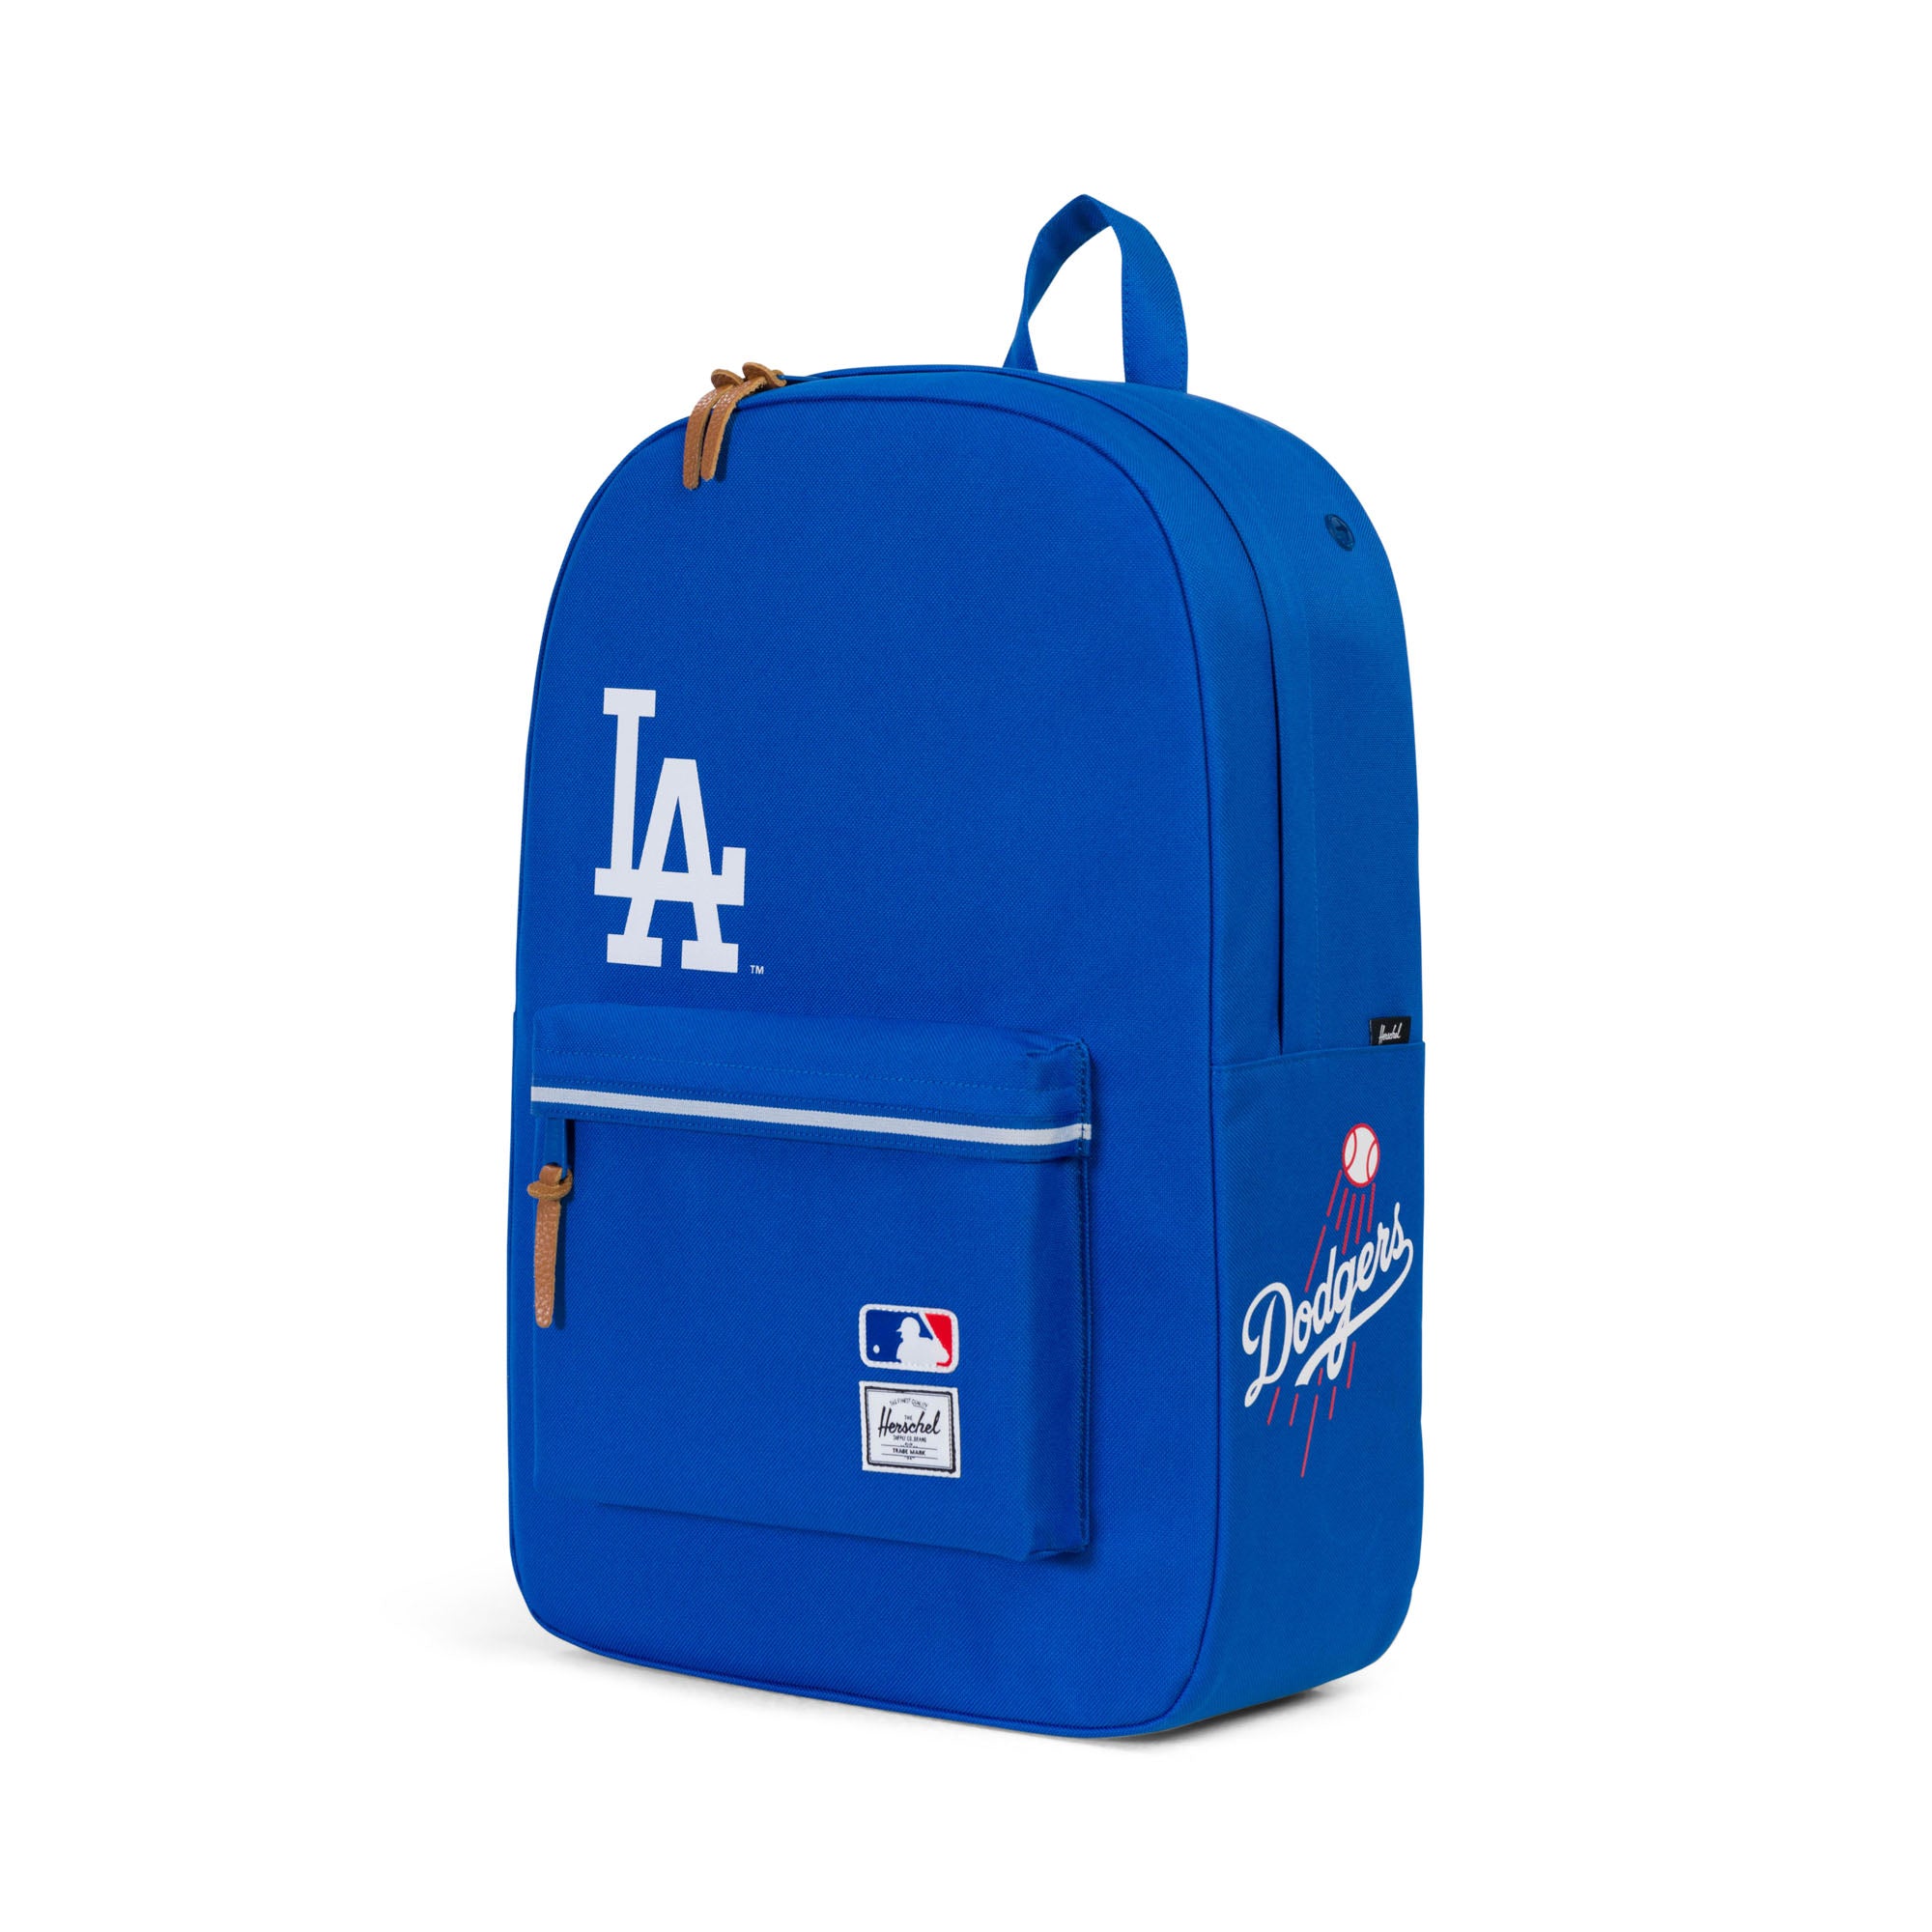 UNDEFEATED INC. - Levi's x MLB Dodgers Collection // Available now